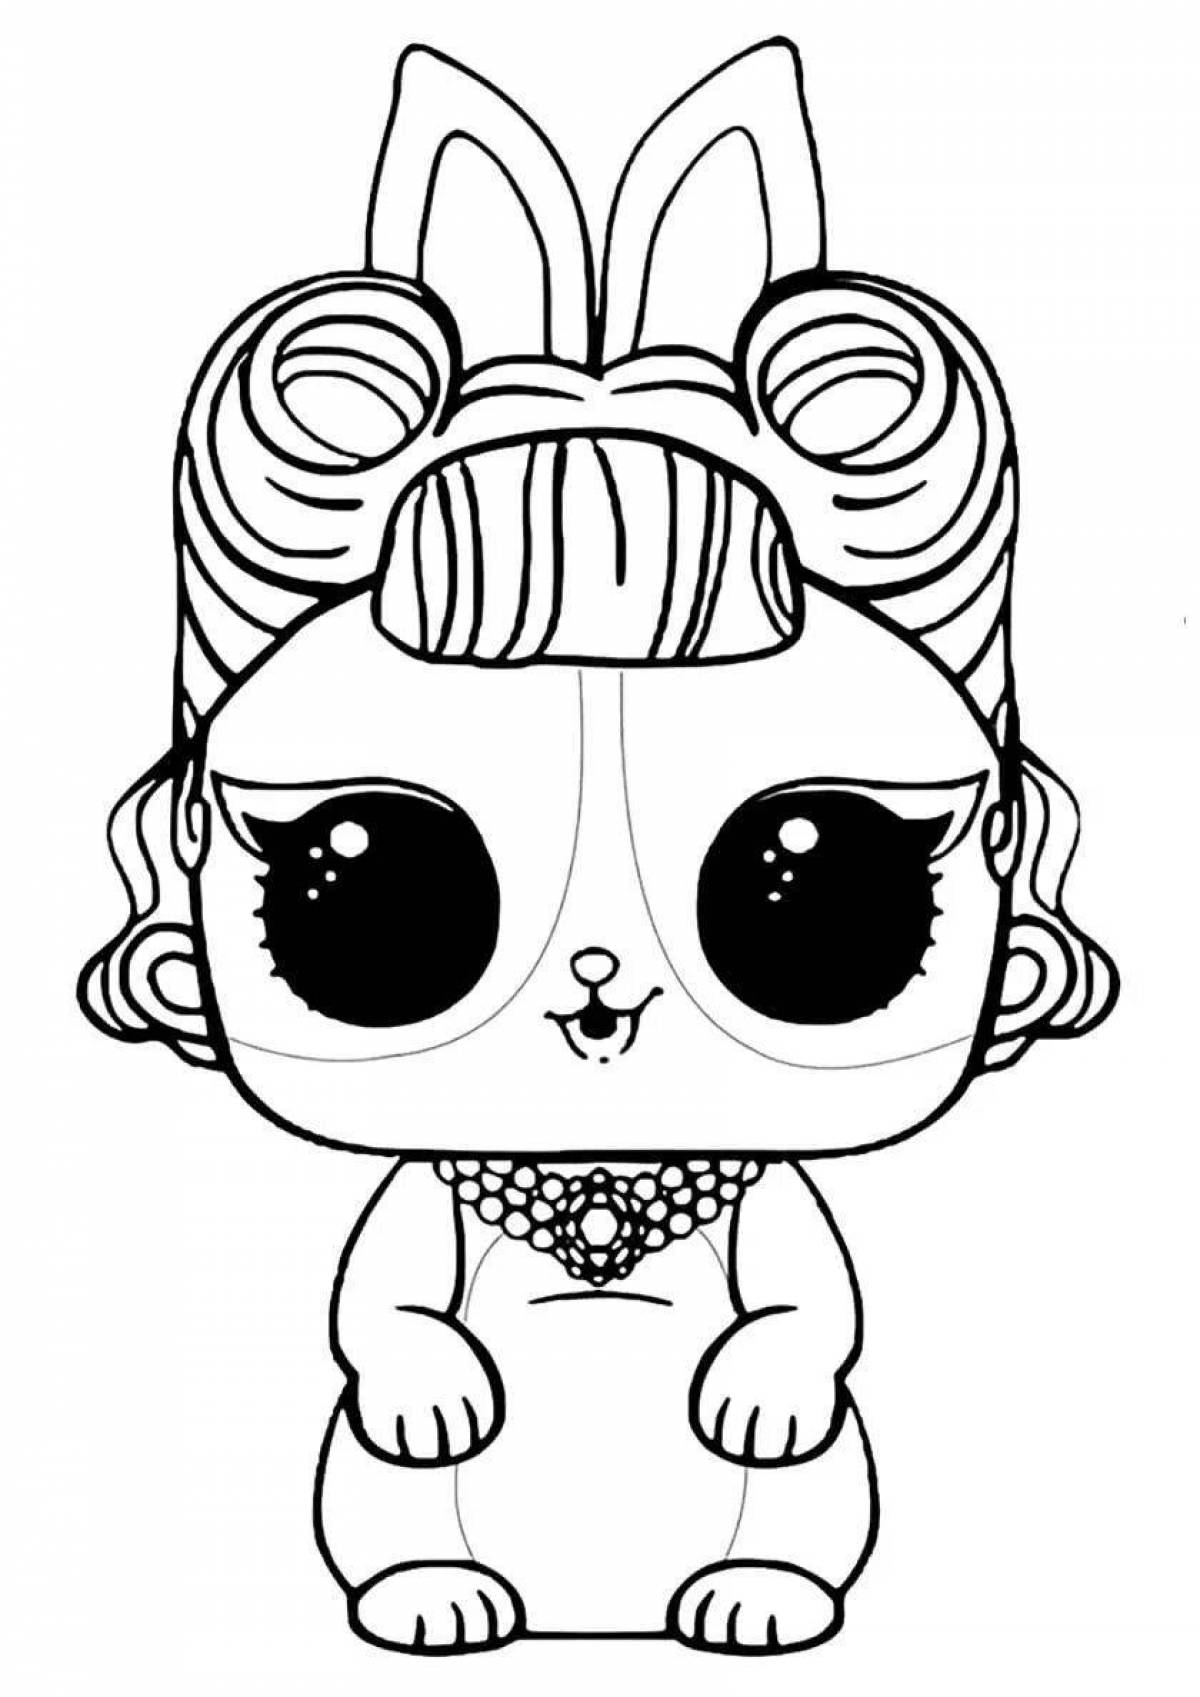 Playful lolo pets coloring page